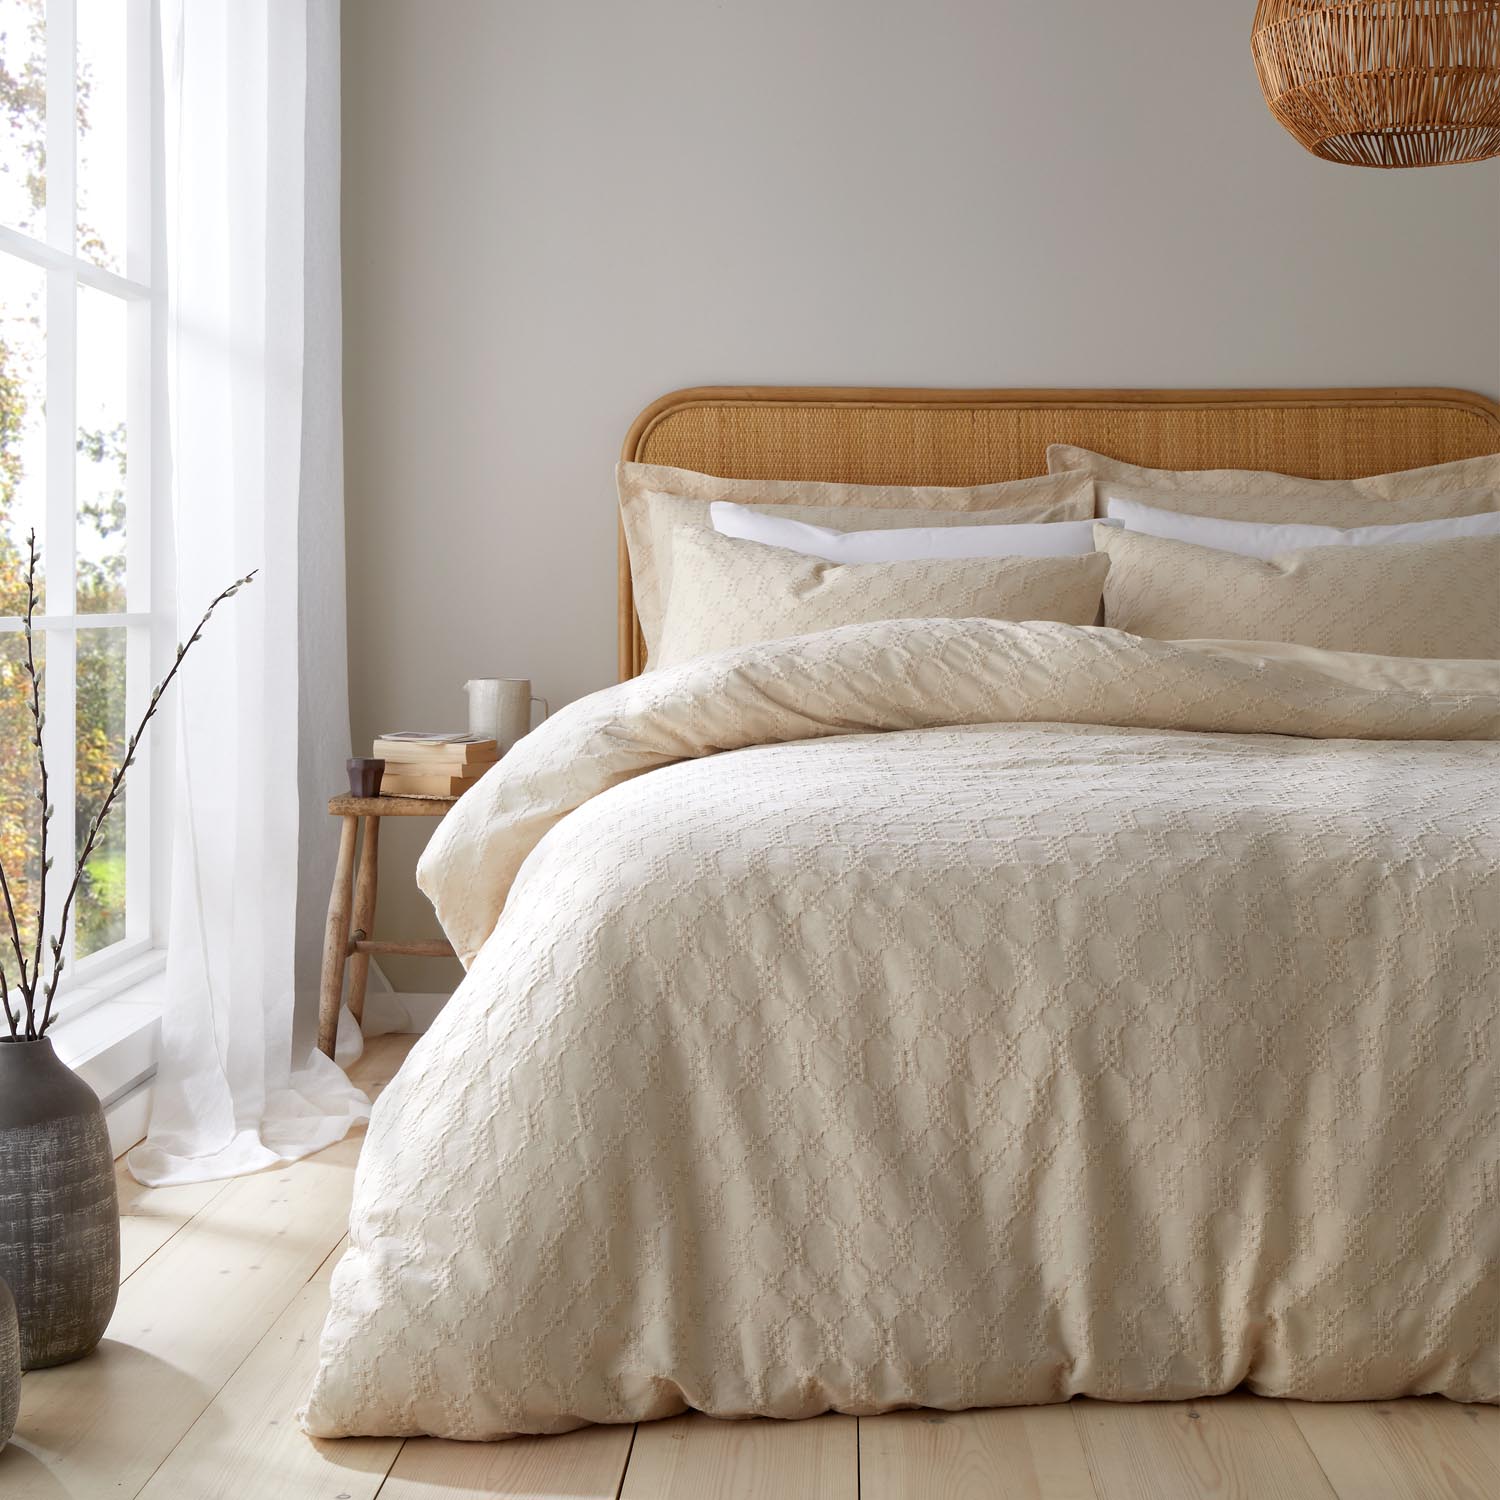 The Home Luxury Collection Textured Waffle Cotton Duvet Cover 1 Shaws Department Stores